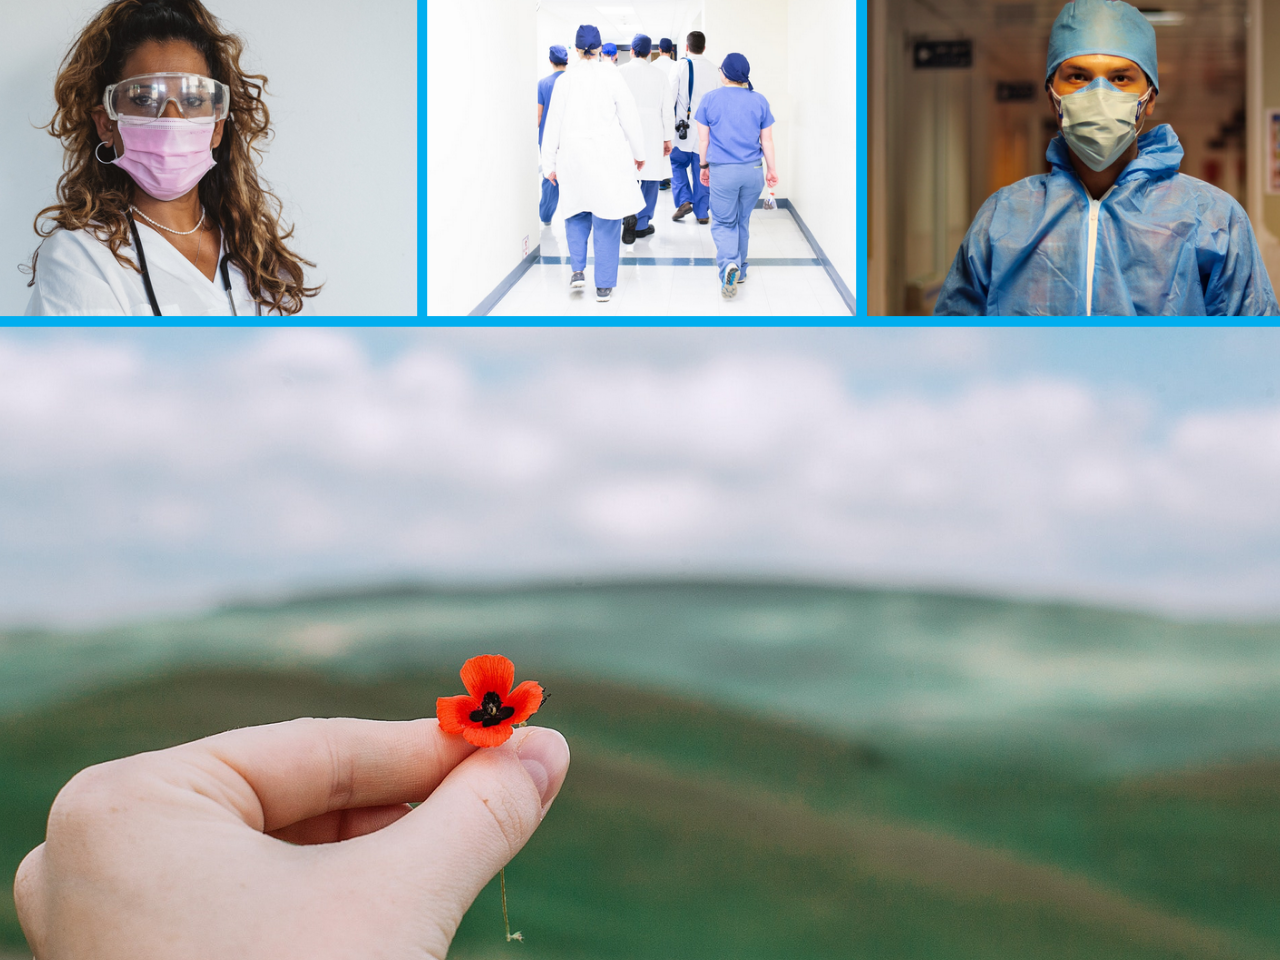 "Photo collage with images of health care workers and a poppy flower on a large field."